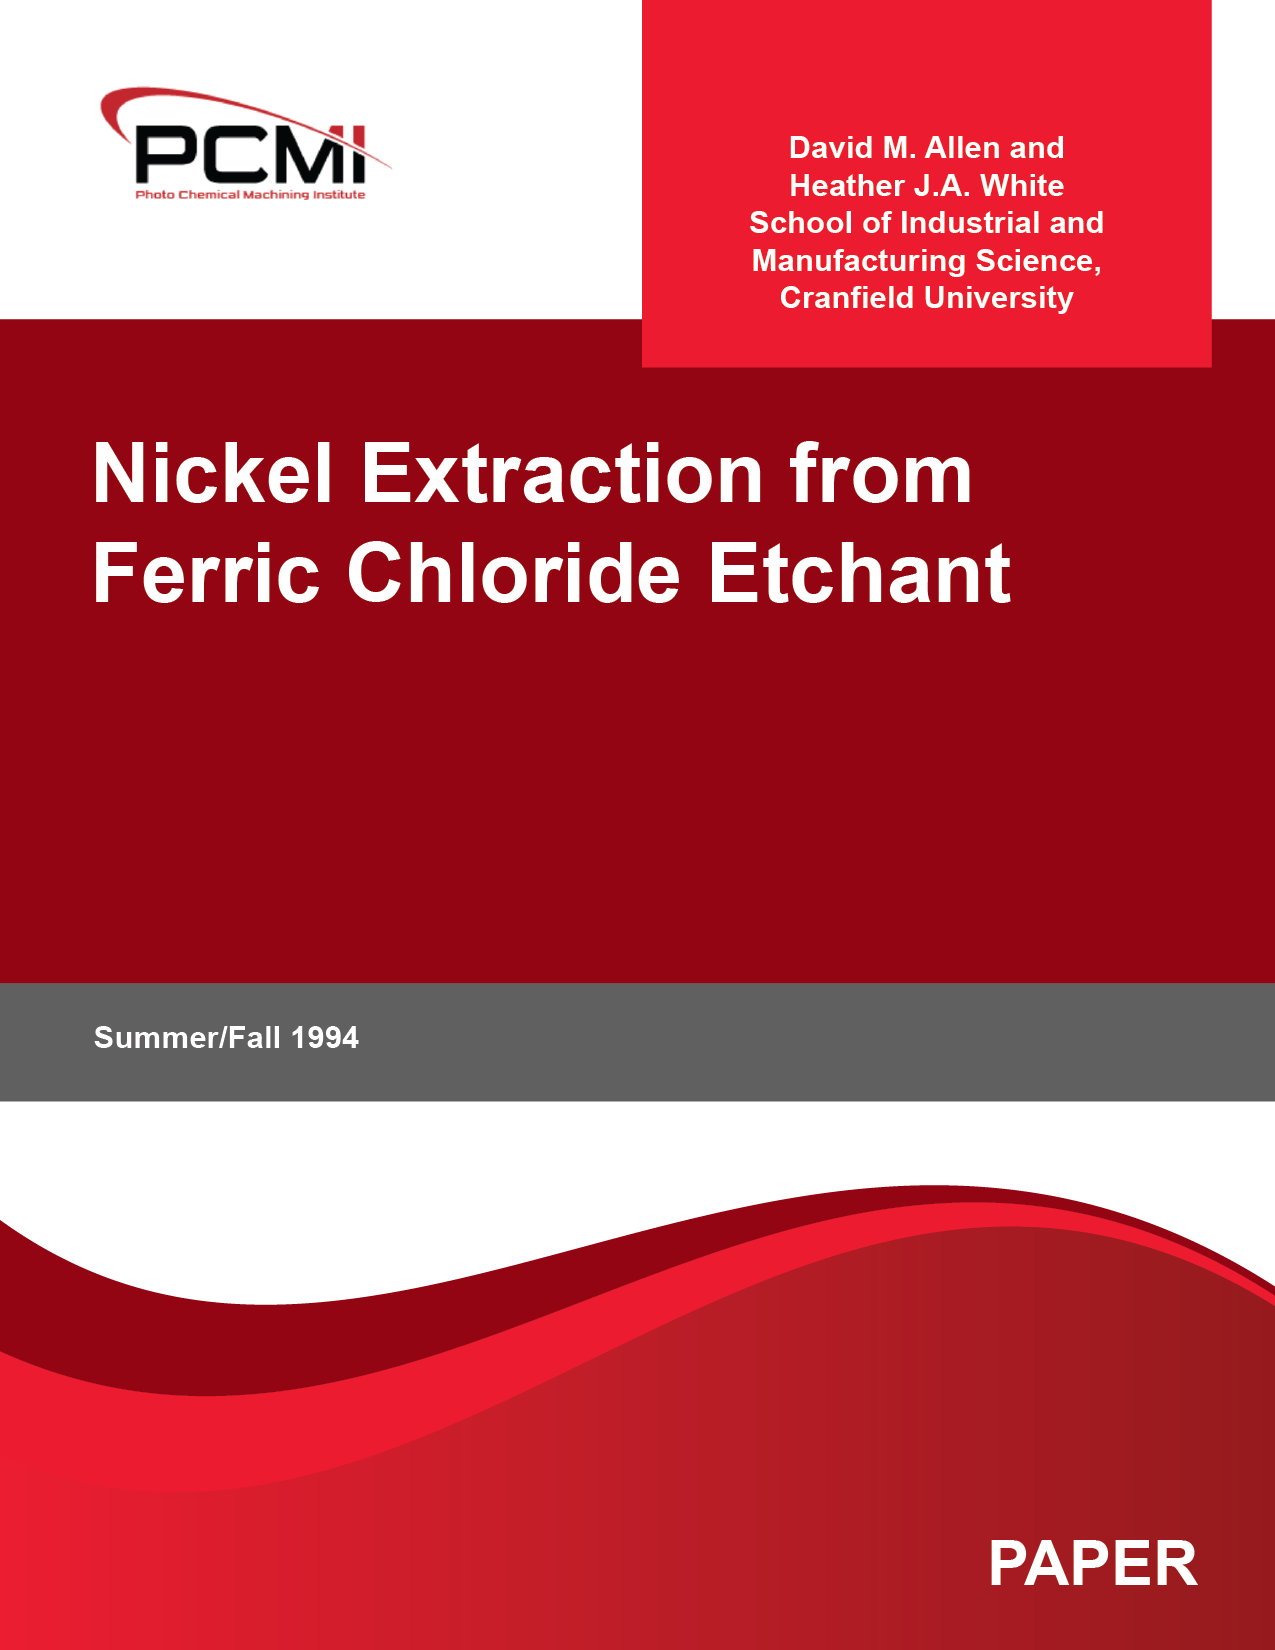 Nickel Extraction from Ferric Chloride Etchant